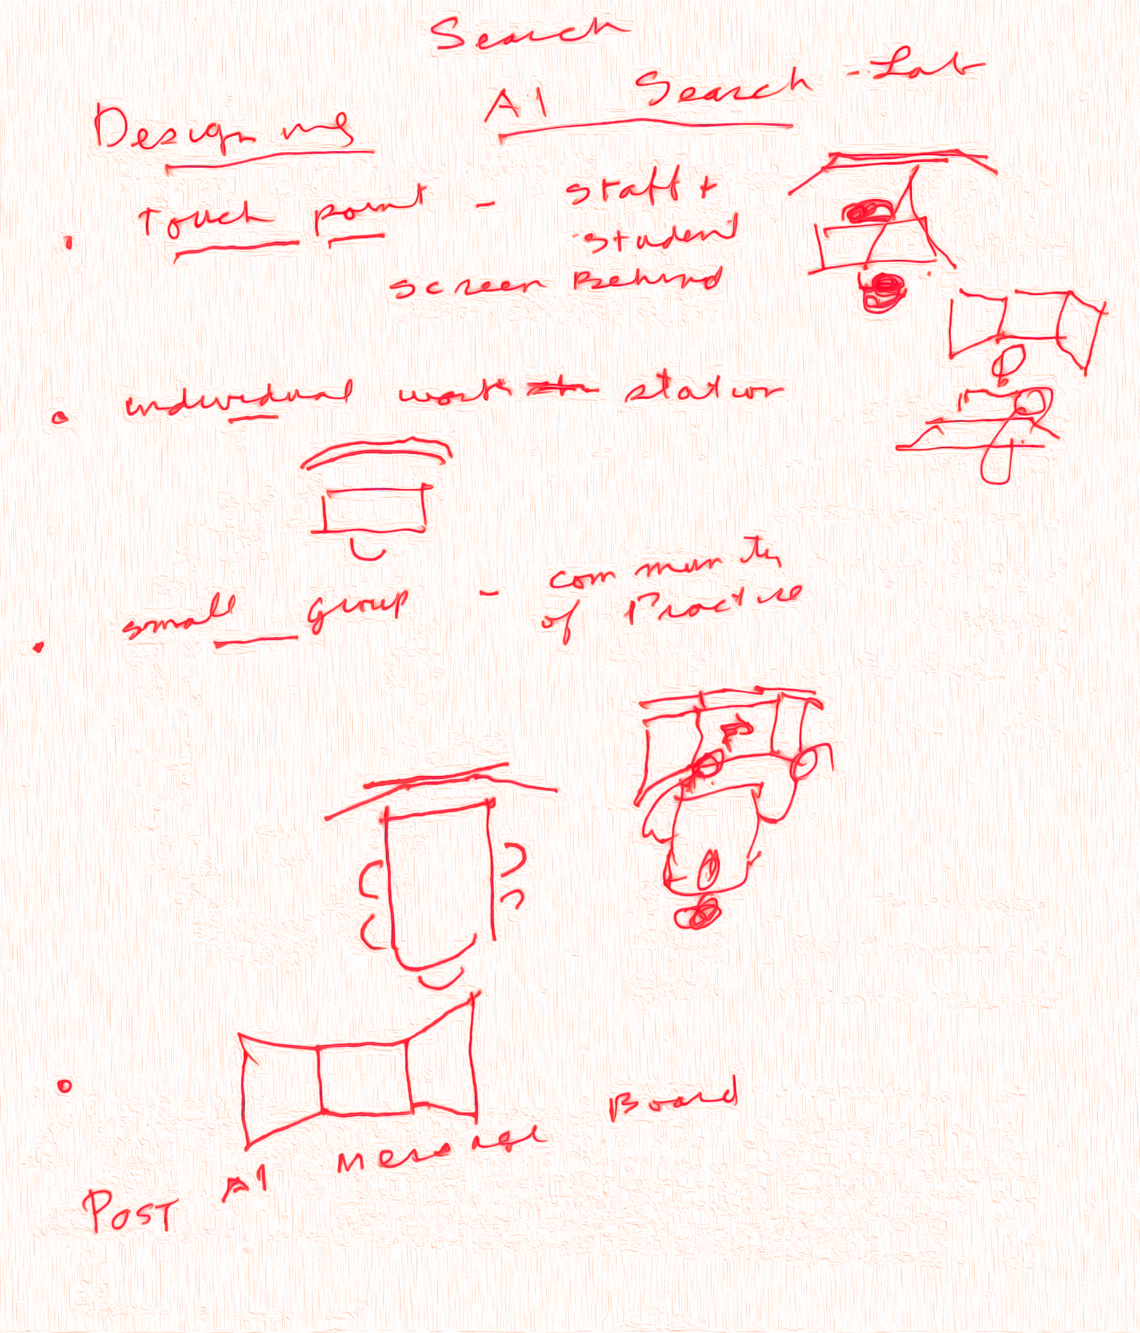 library consultant sketch